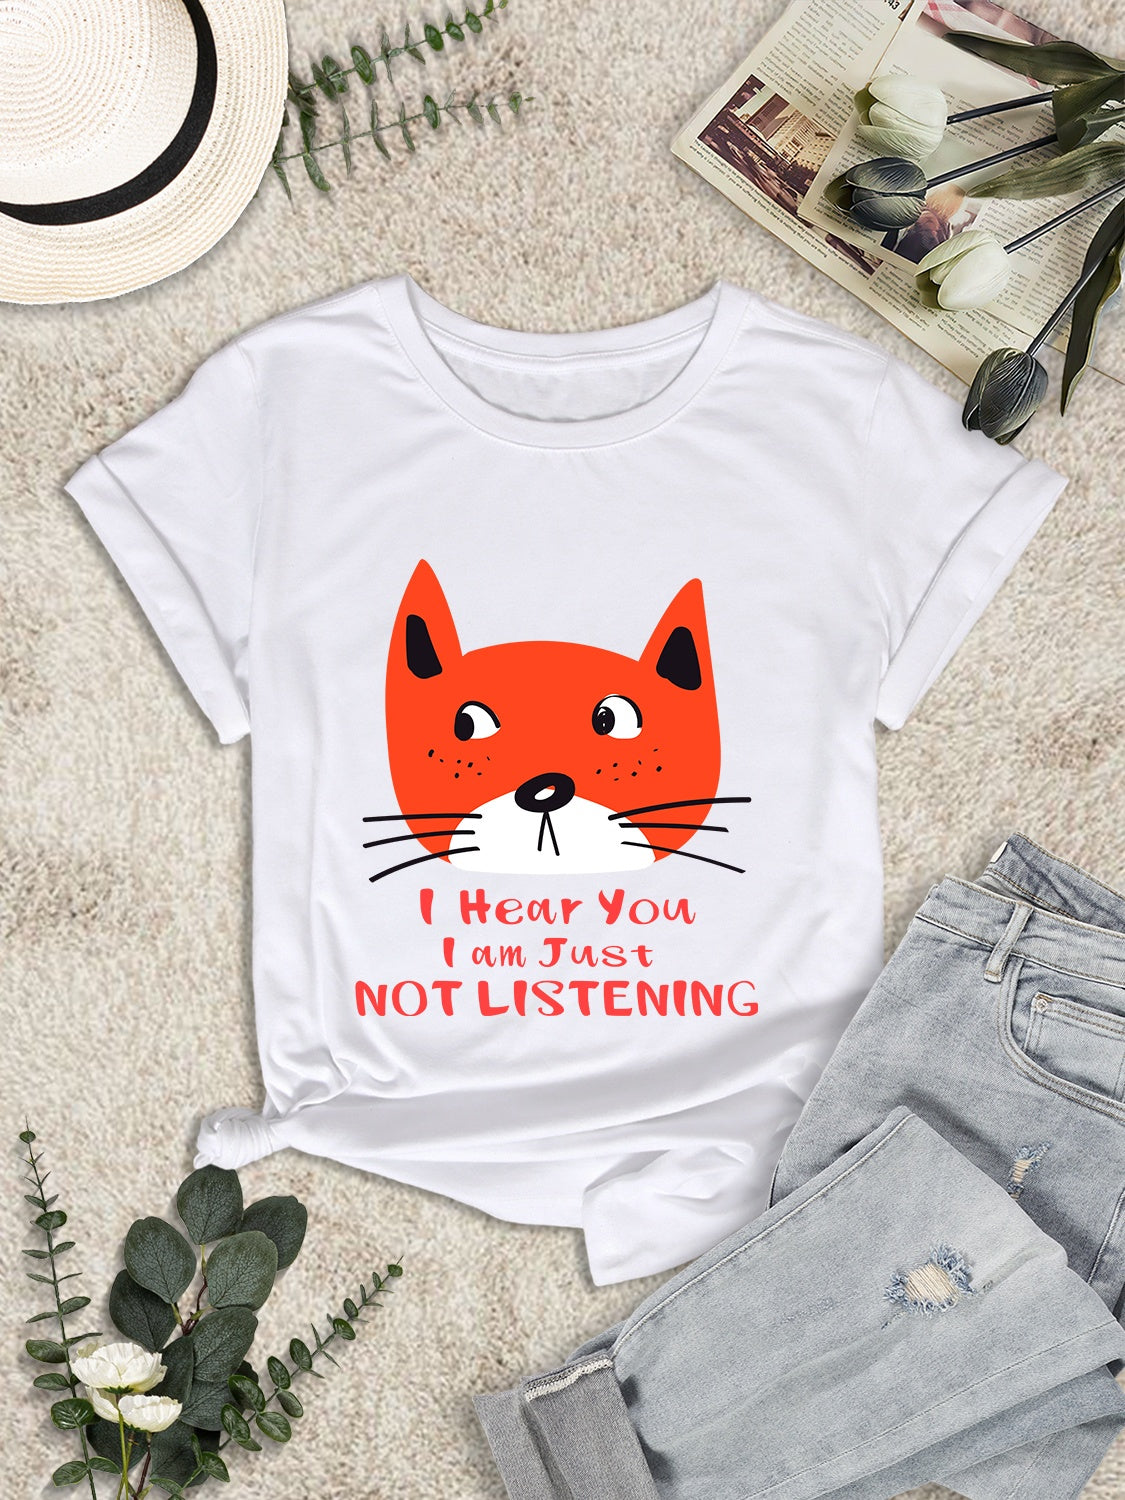 I HEAR YOU I AM JUST NOT LISTENING Round Neck T-Shirt